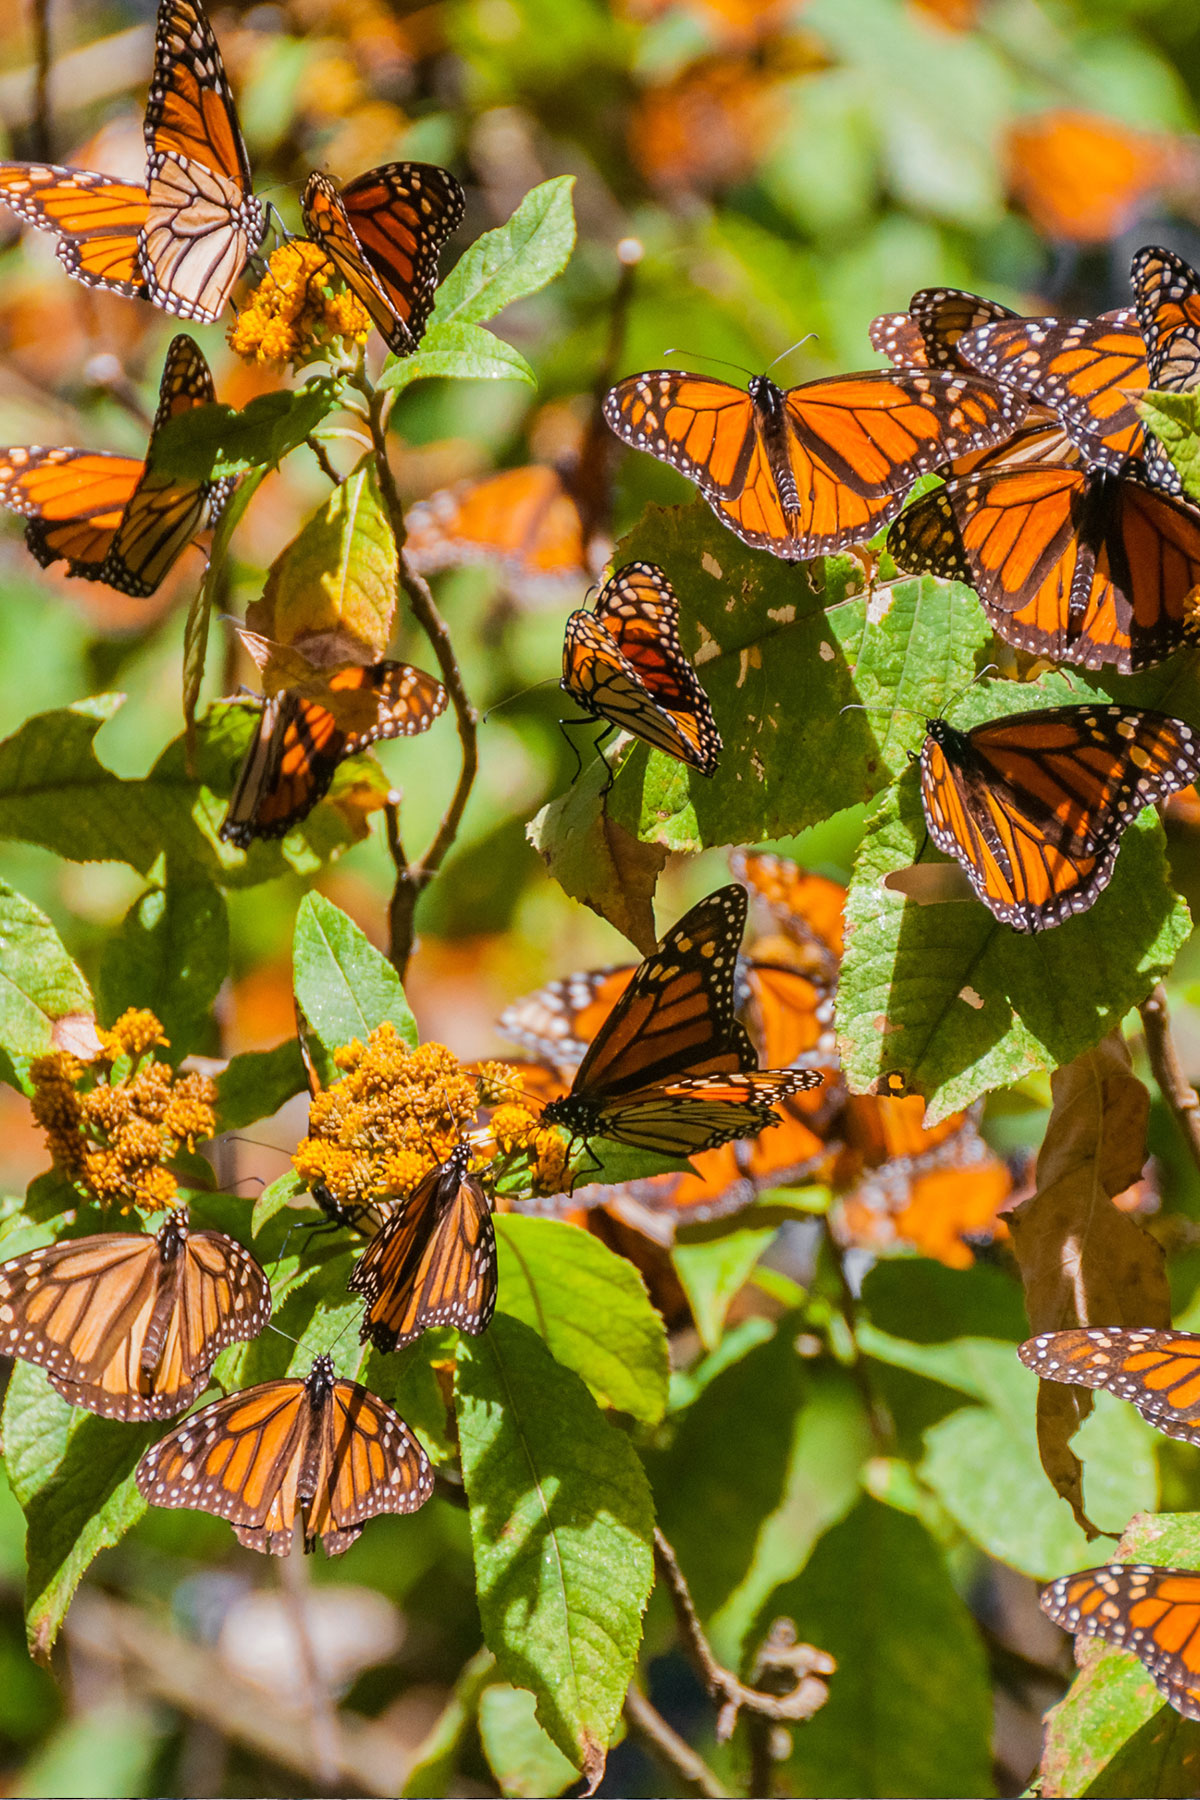 Many monarch butterflies gather together.